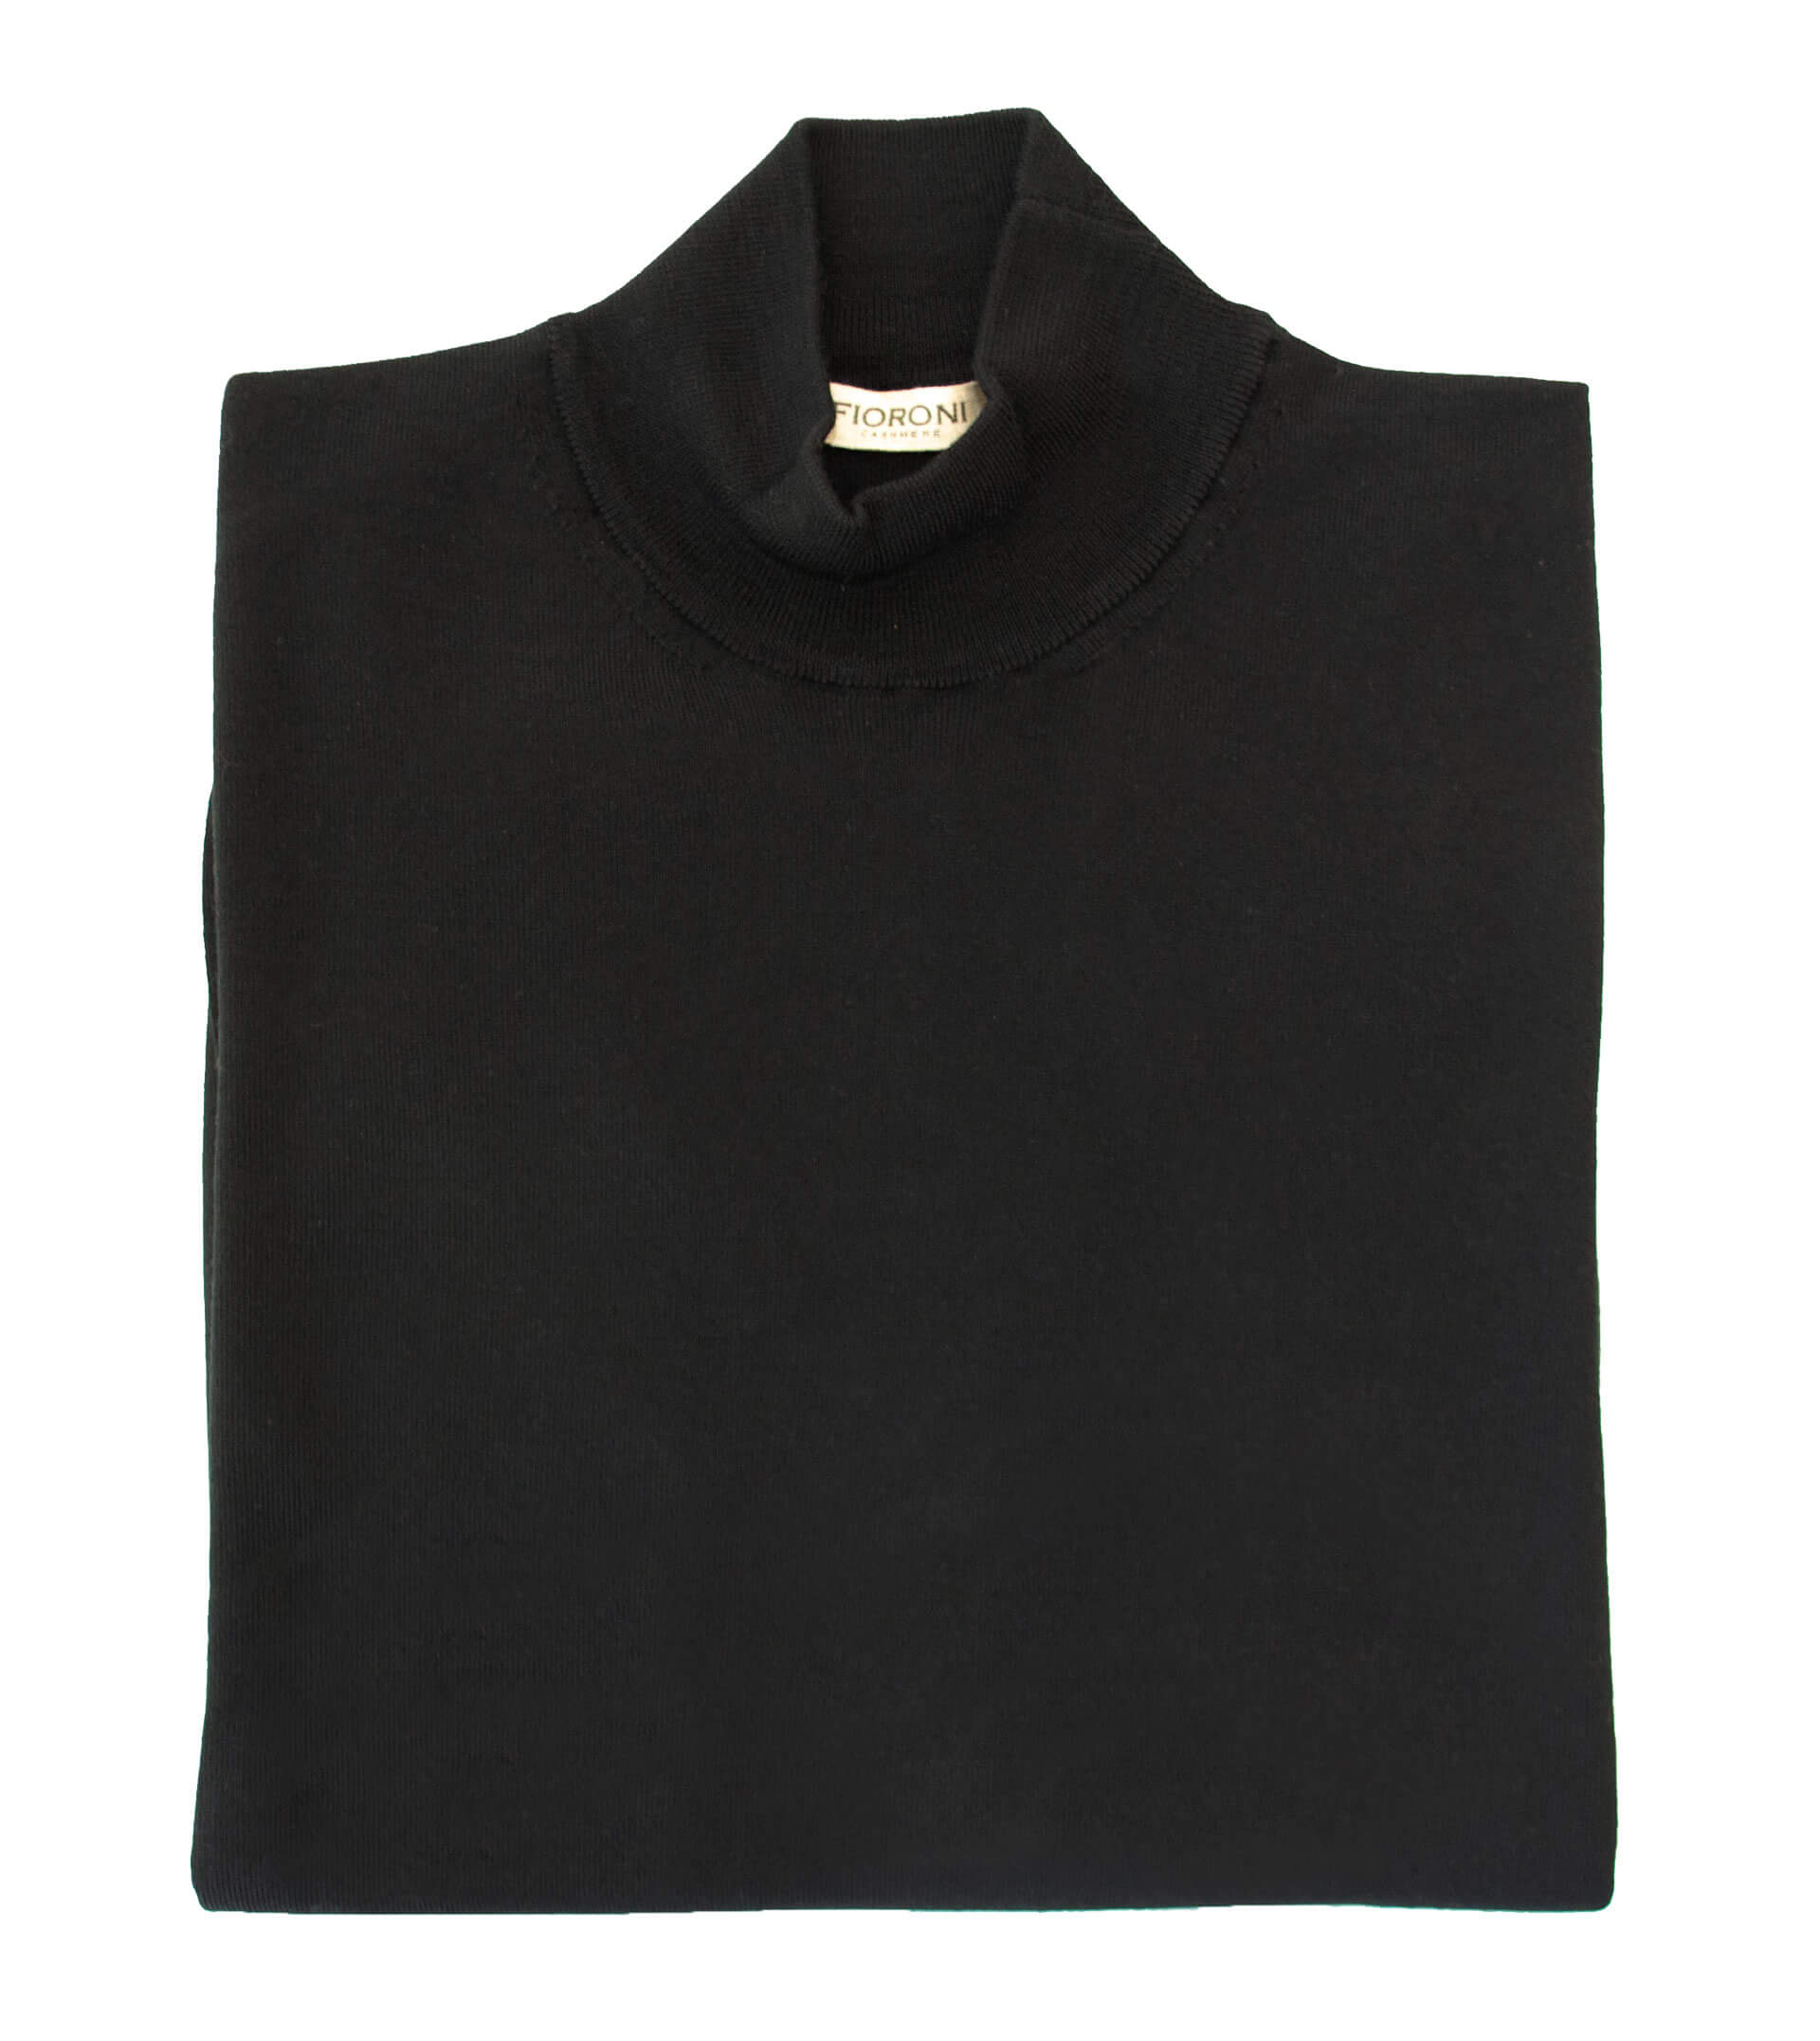 FIORONI Wool/Cashmere Mock-Neck Sweater +Colors